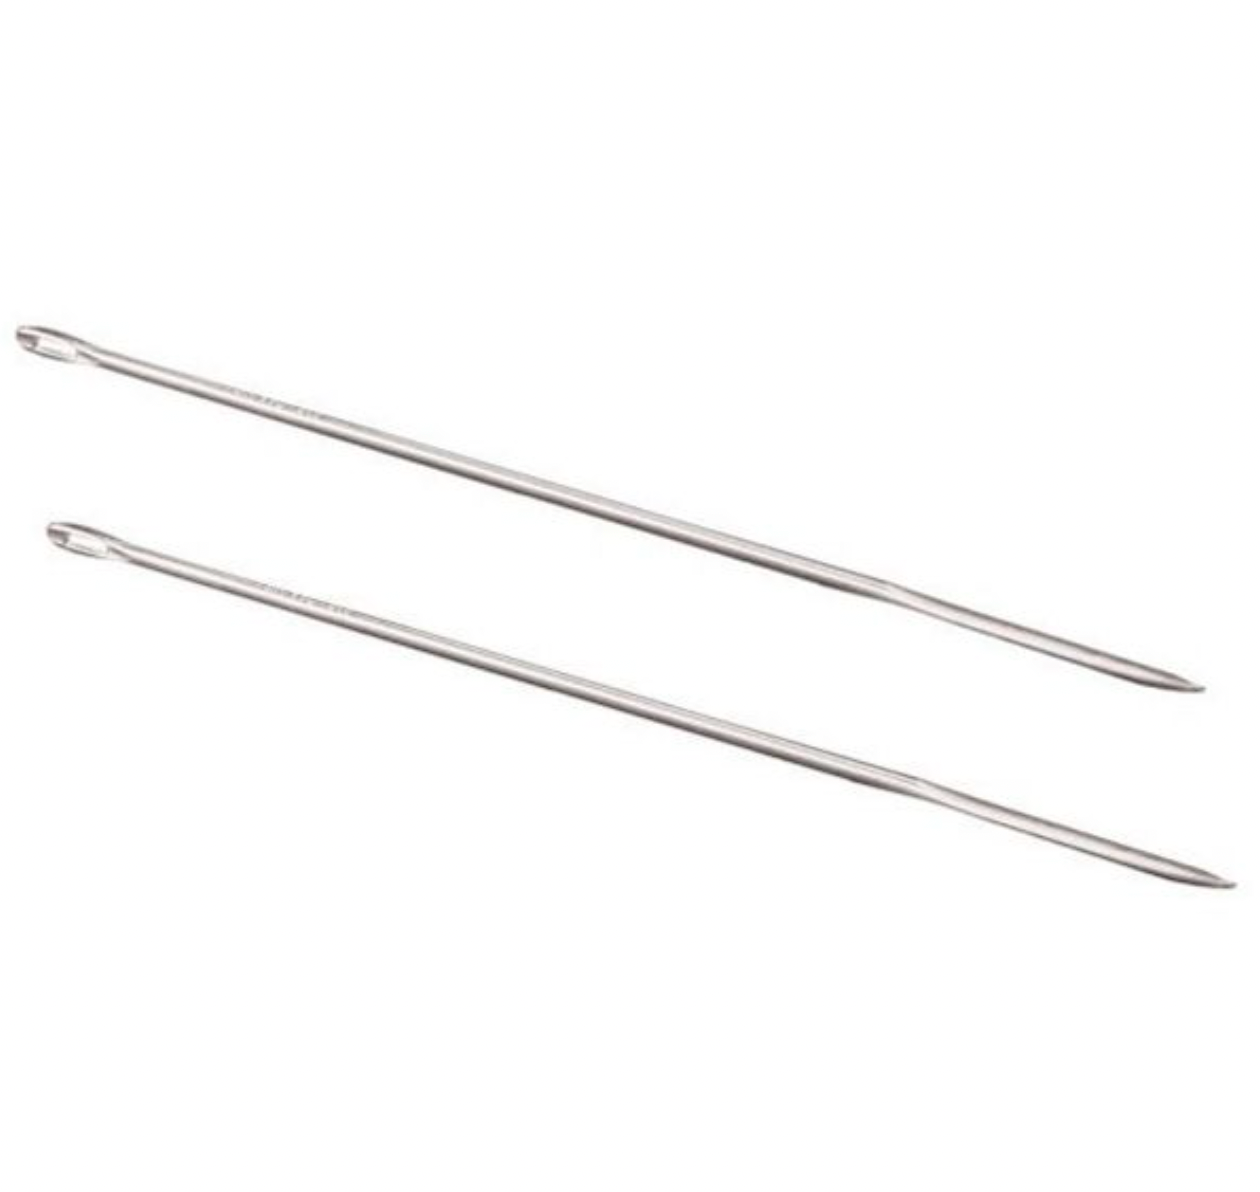 Roasting Straight Trussing Needles for Turkey, Poultry and Stuffed Roasts – Set of 2